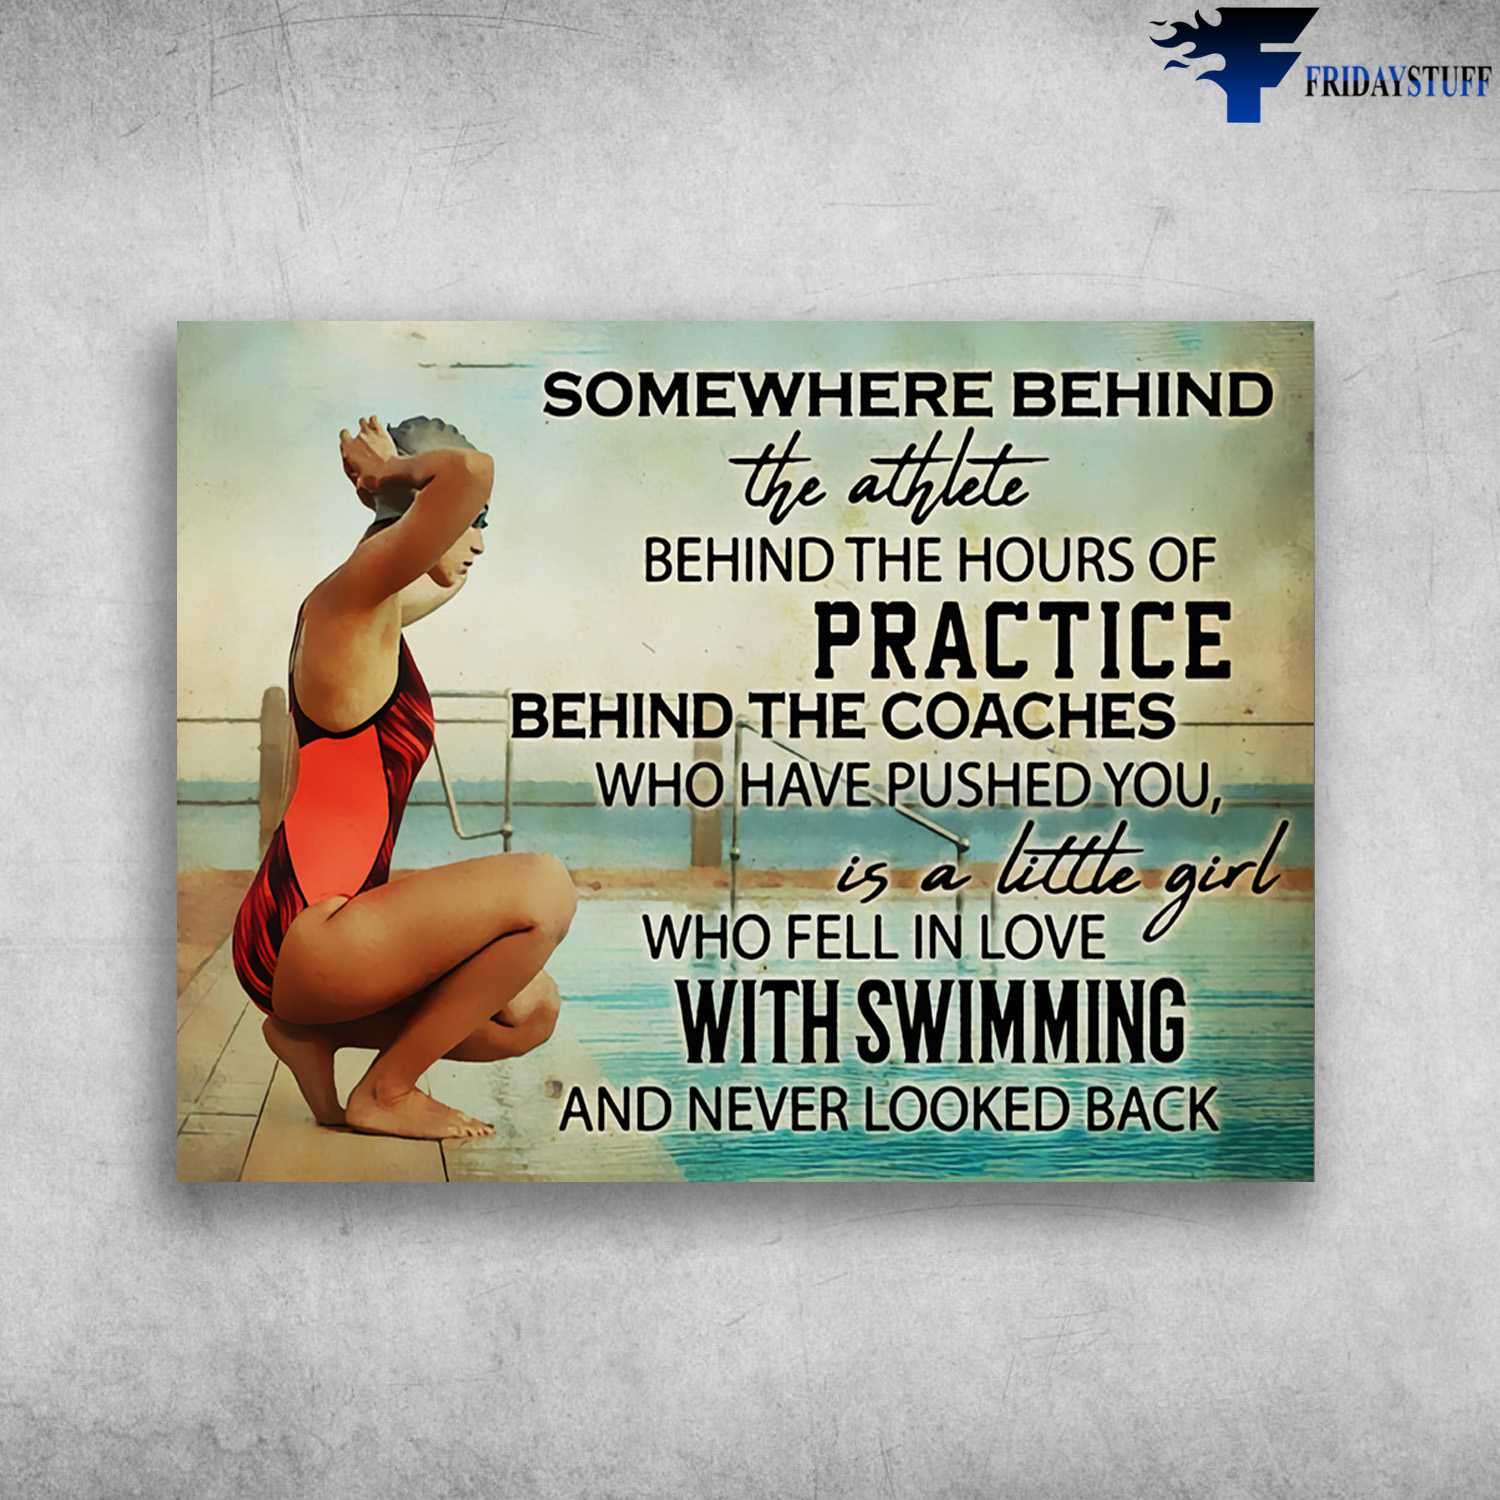 Swimming Athlete, Swimming Poster, Somewhere Behind The Athlete Behind The Hours Of Practice, Behind The Coaches, Who Have Pushed You